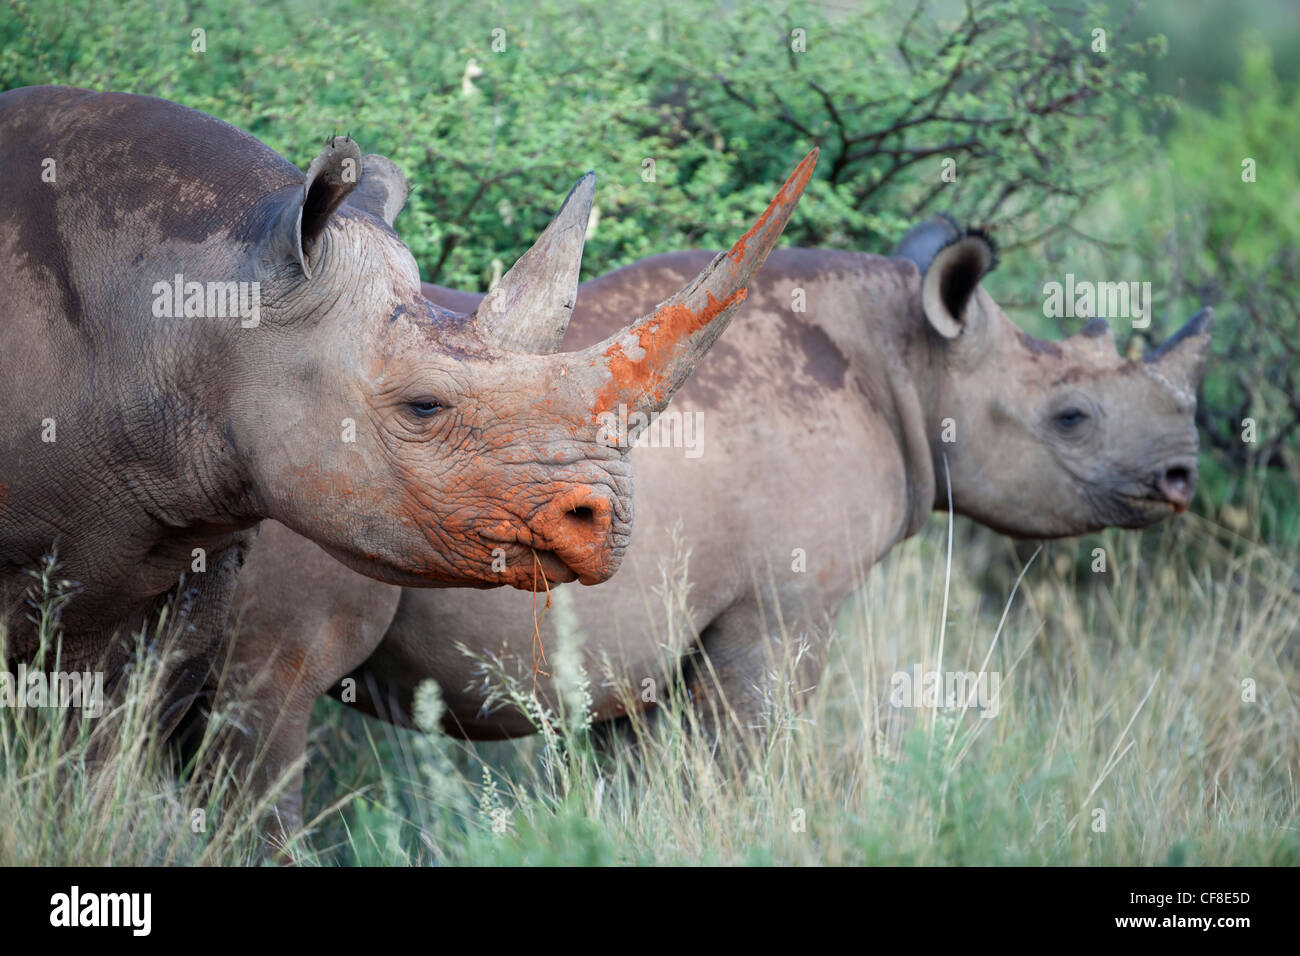 Black rhino with calf, Diceros bicornis, Northern Cape, South Africa Stock Photo